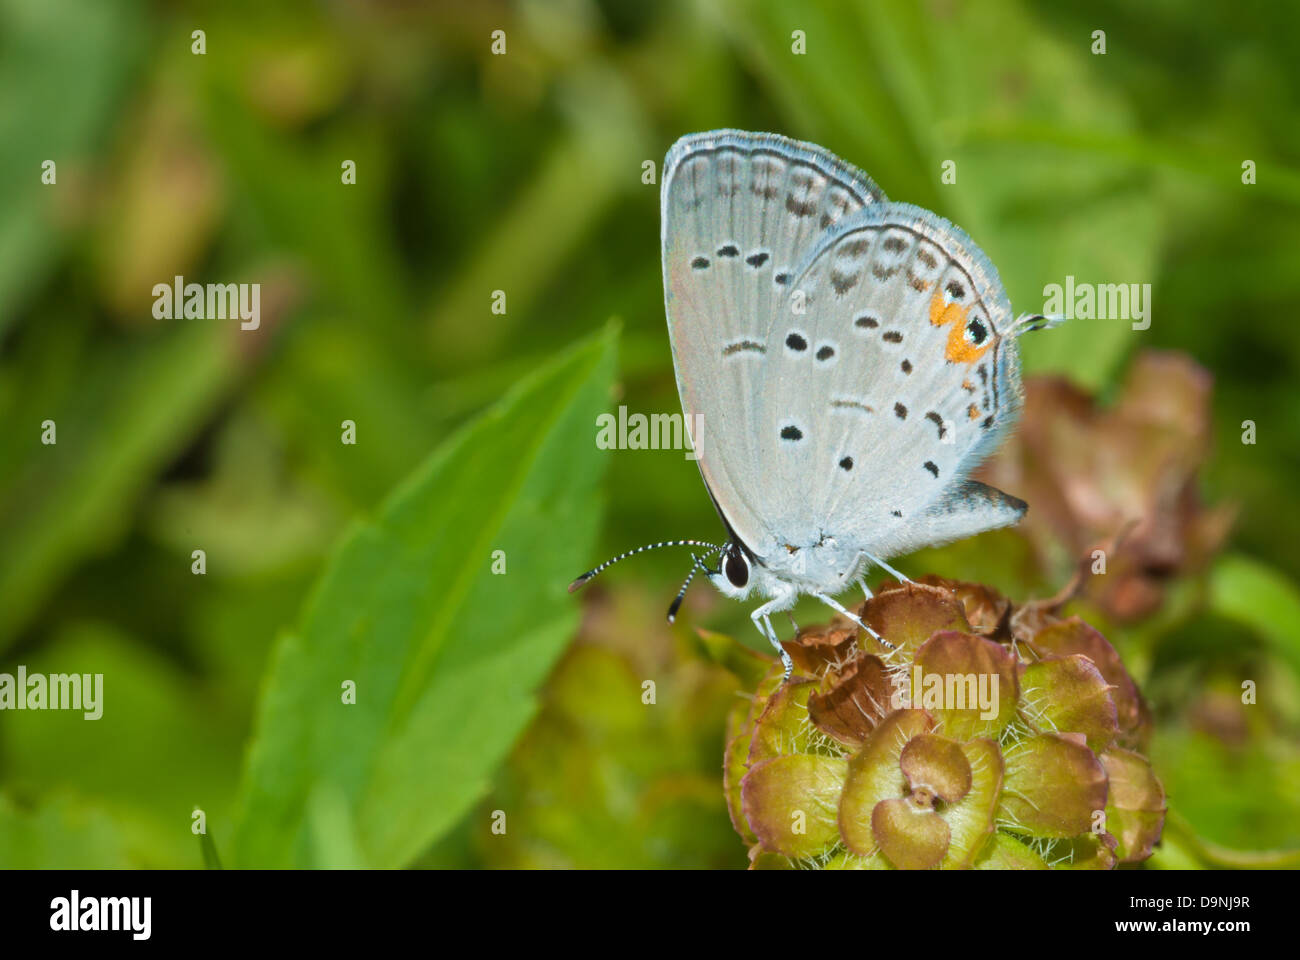 An eastern tailed blue butterfly (Everes comyntas) perched in a meadow, Little Cataraqui Conservation Area, Ontario Stock Photo